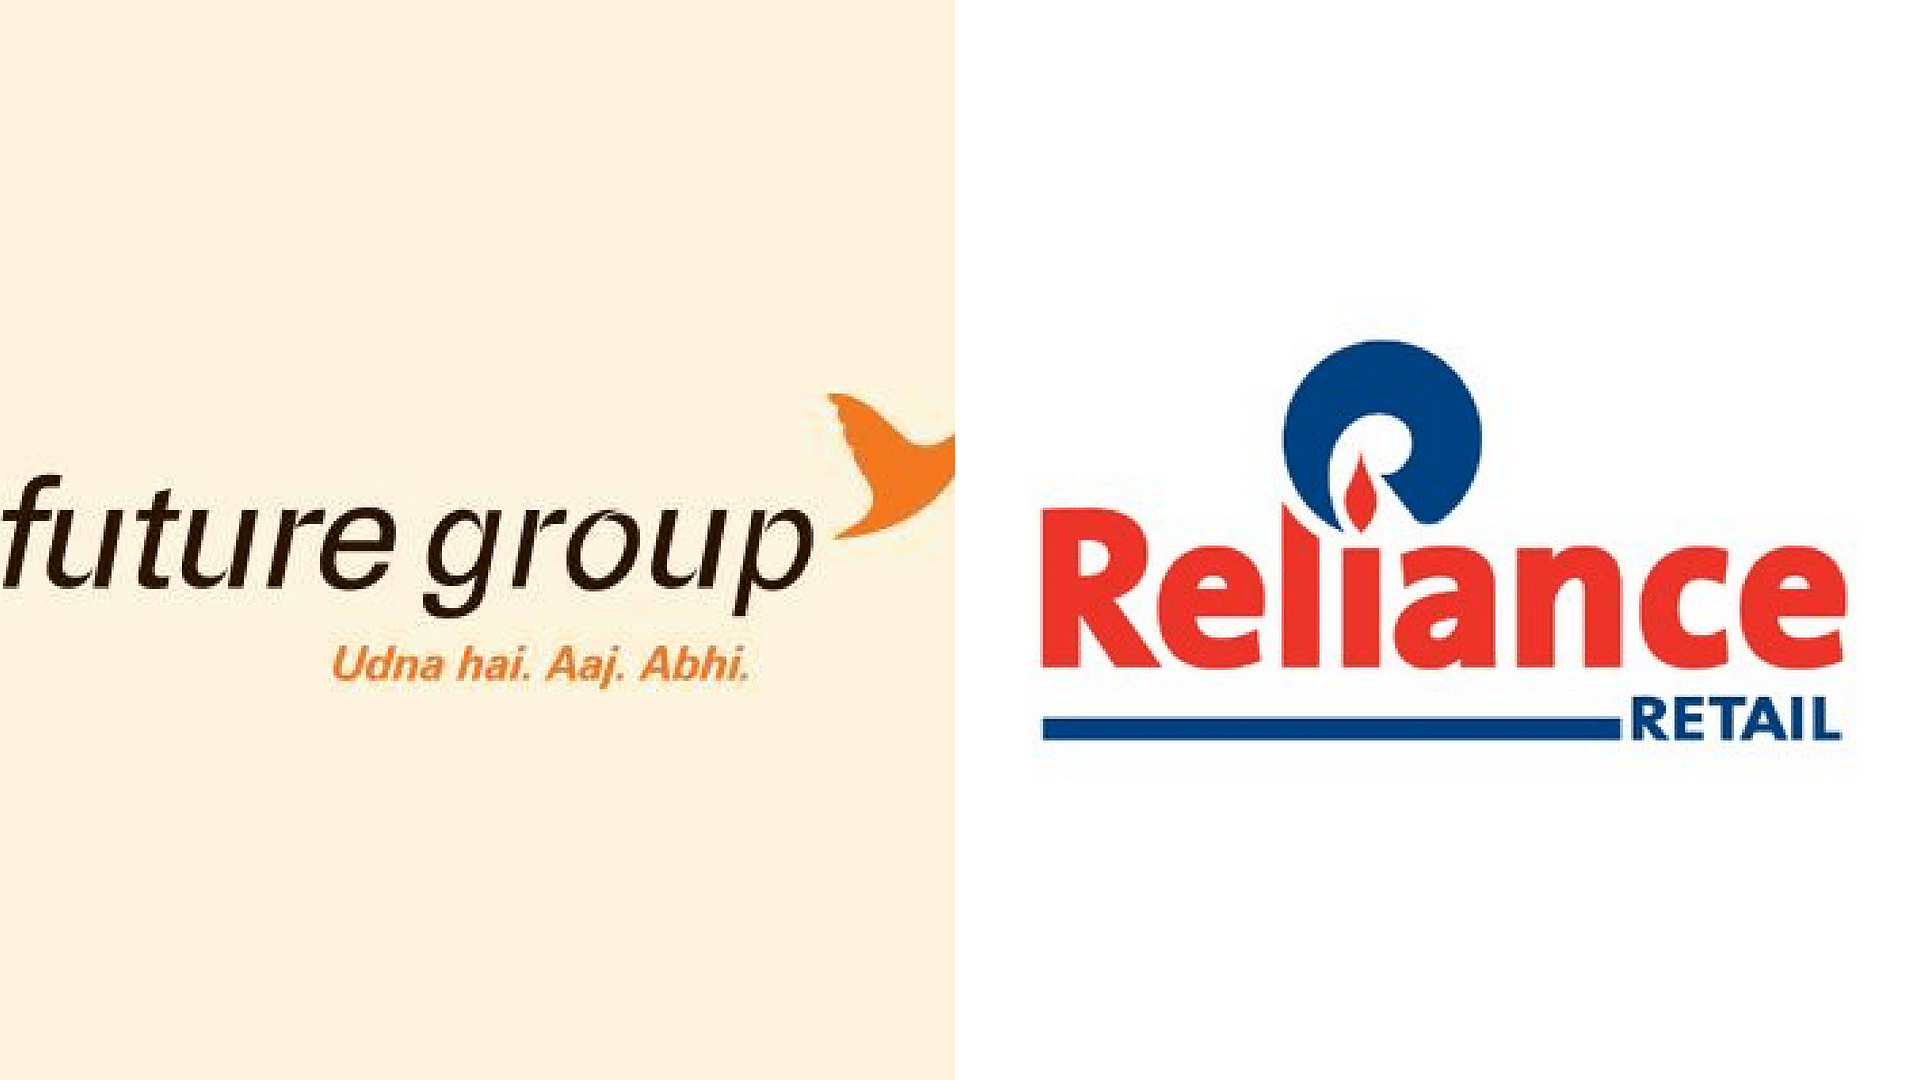 Reliance Retail Ltd has been widening its lead over Kishore Biyani’s Future Group.